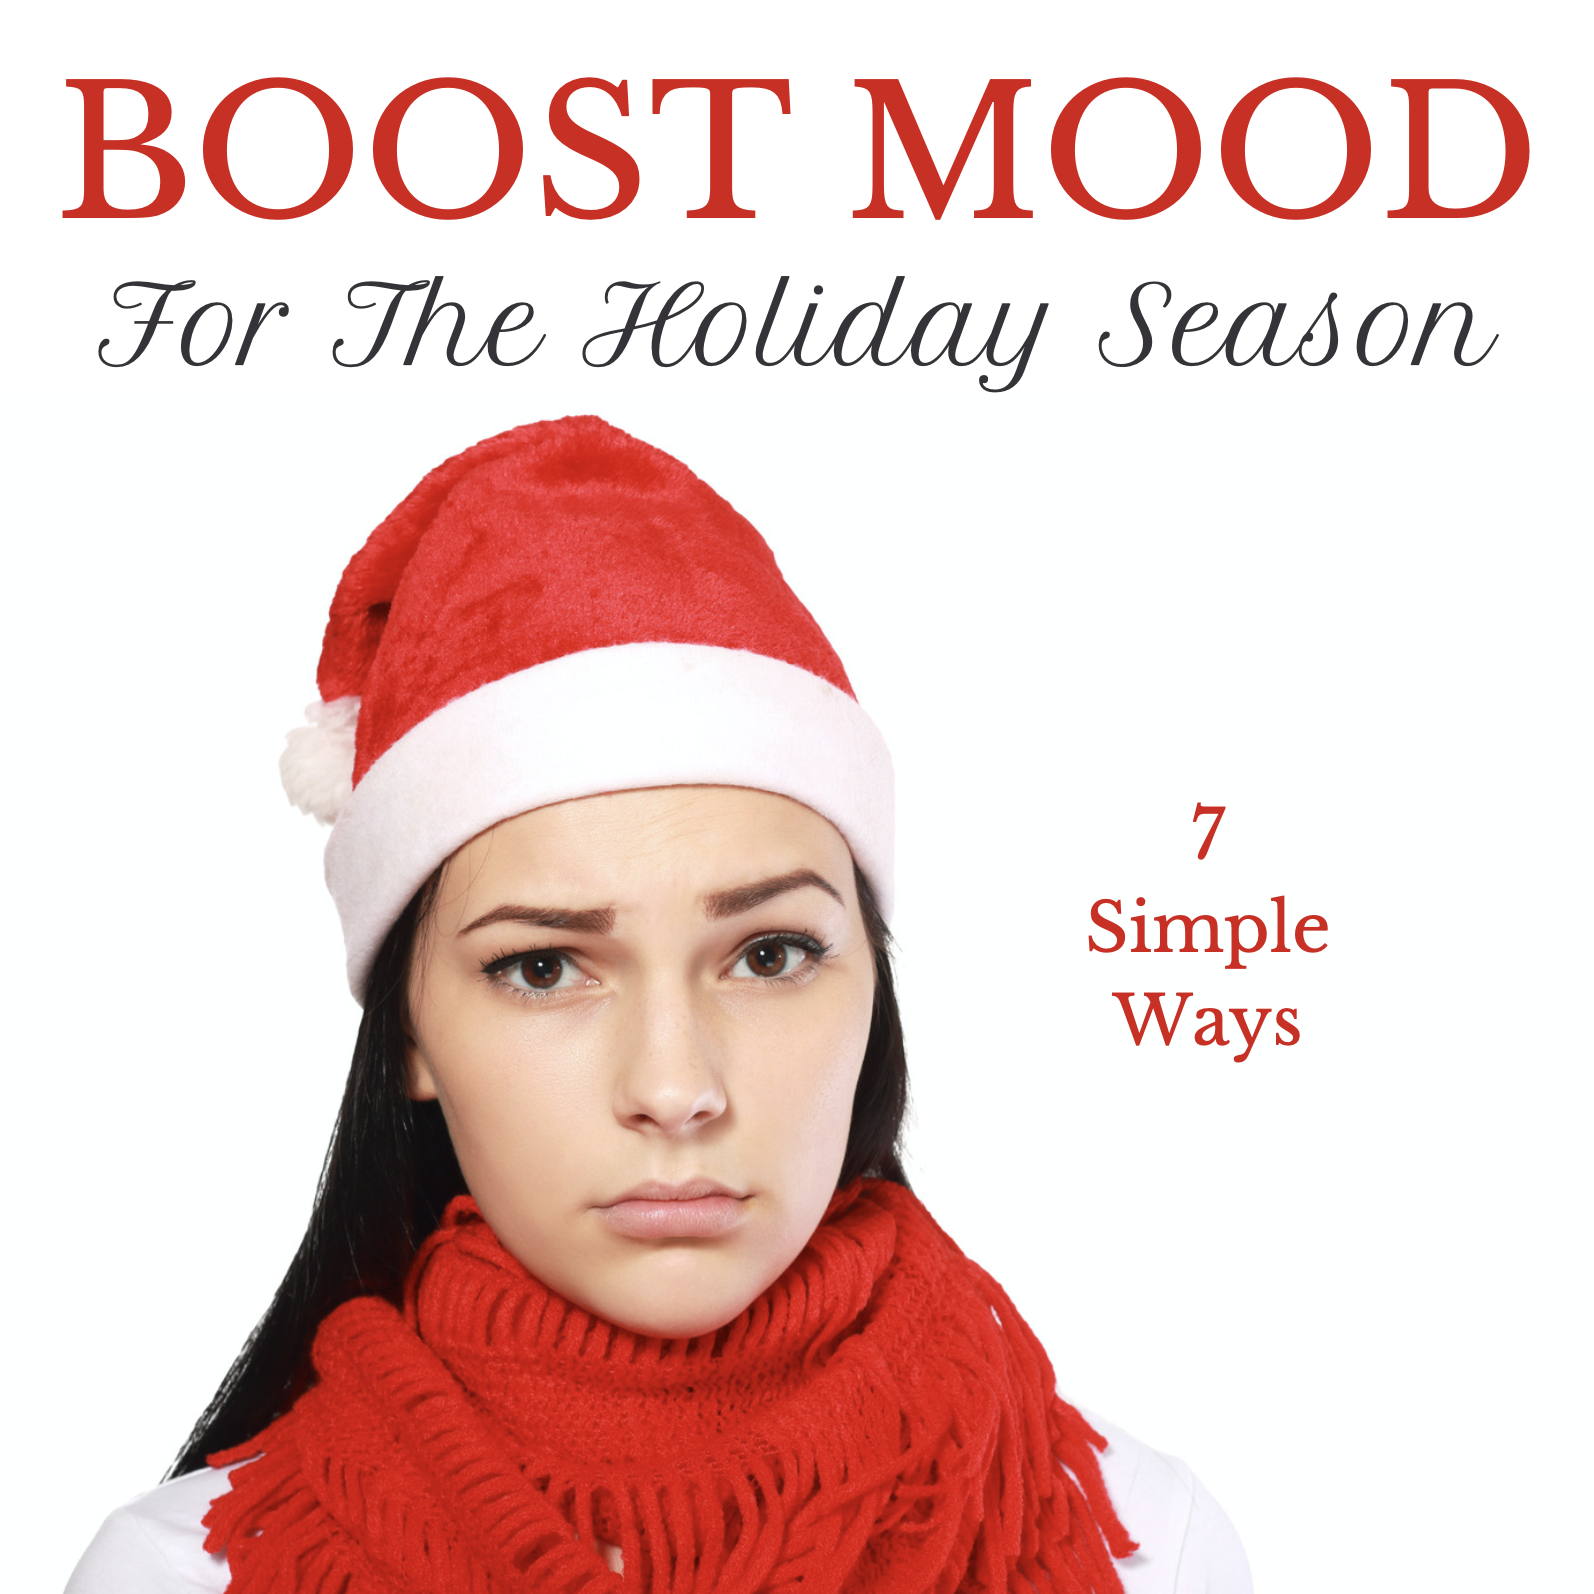 How to Boost Your Mood for the Holidays